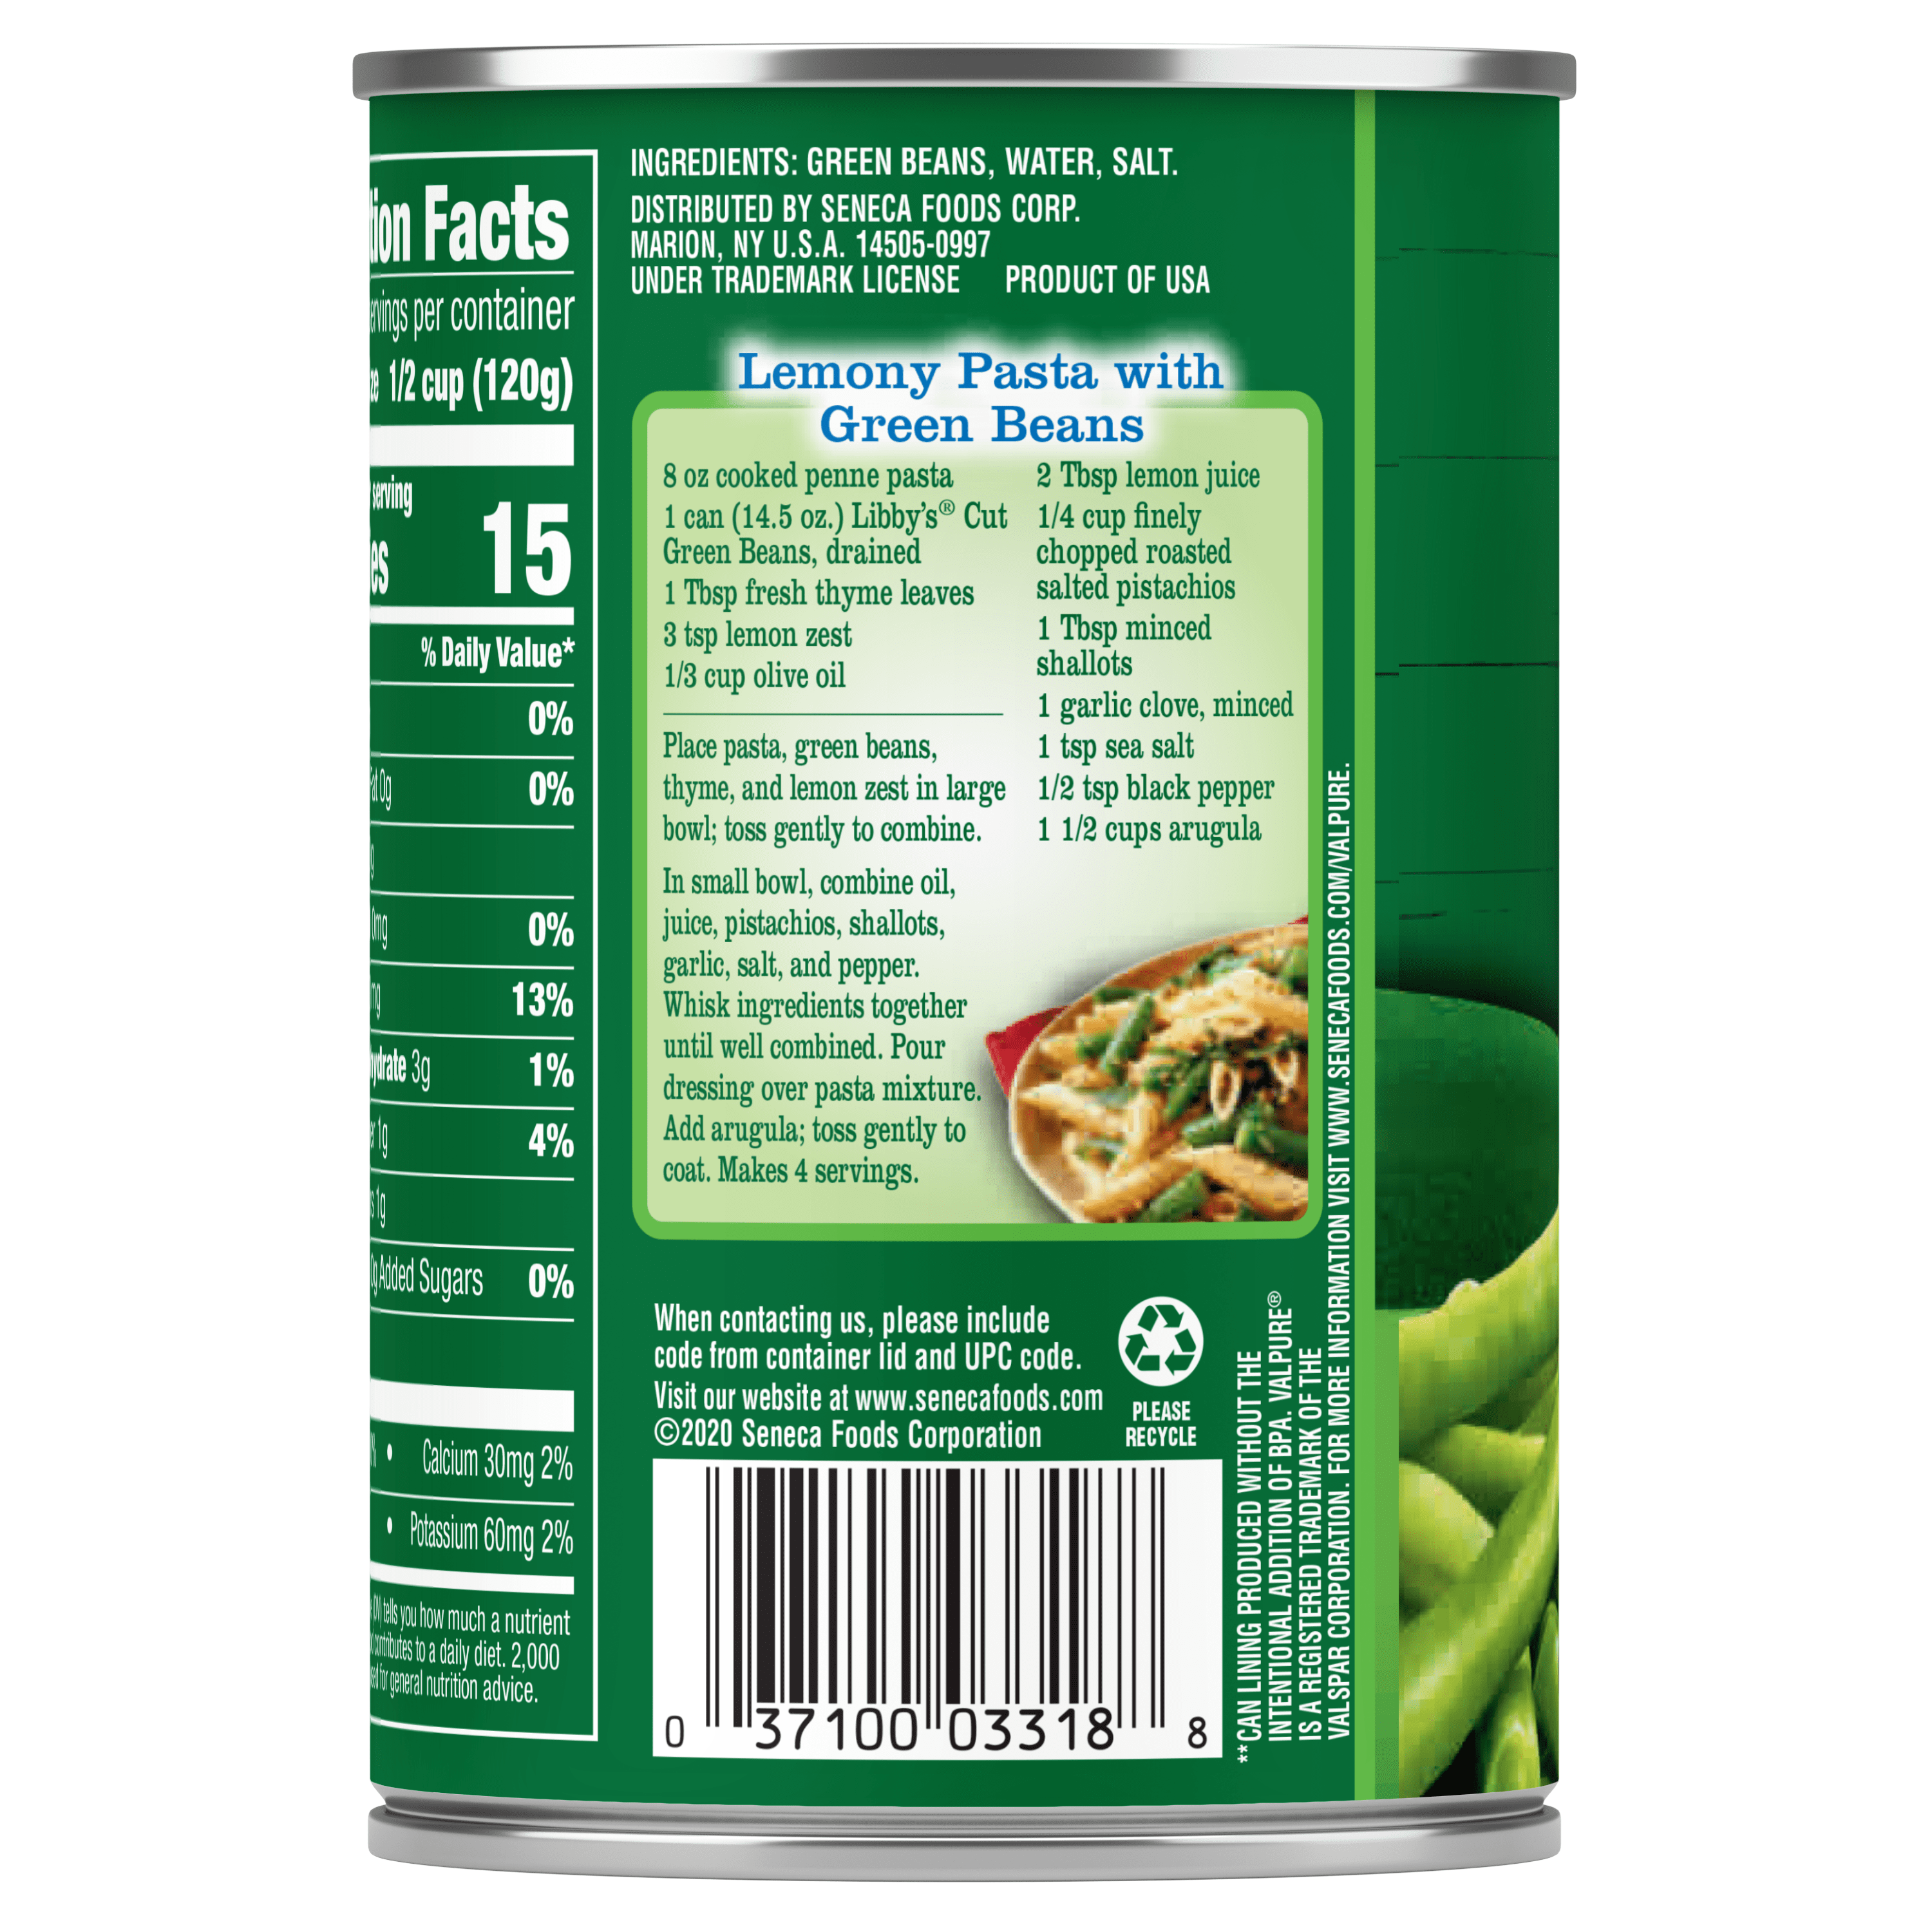 Canned Green Beans Ingredient statement and Recipe